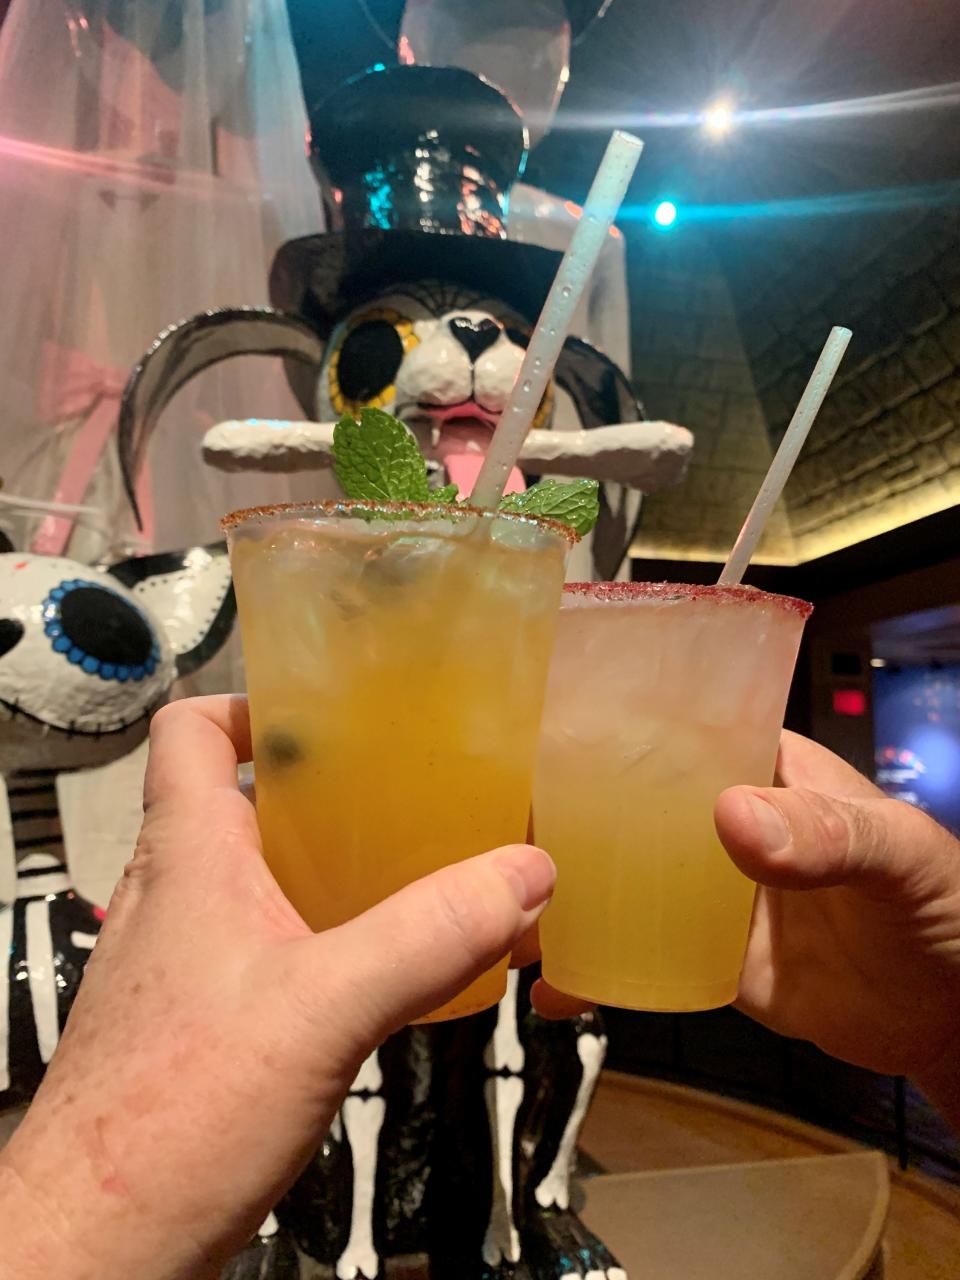 The best thing about the Wild One and El Diablo margaritas at La Cava del Tequila at EPCOT? They're available all year, and not just during the International Food & Wine Festival.